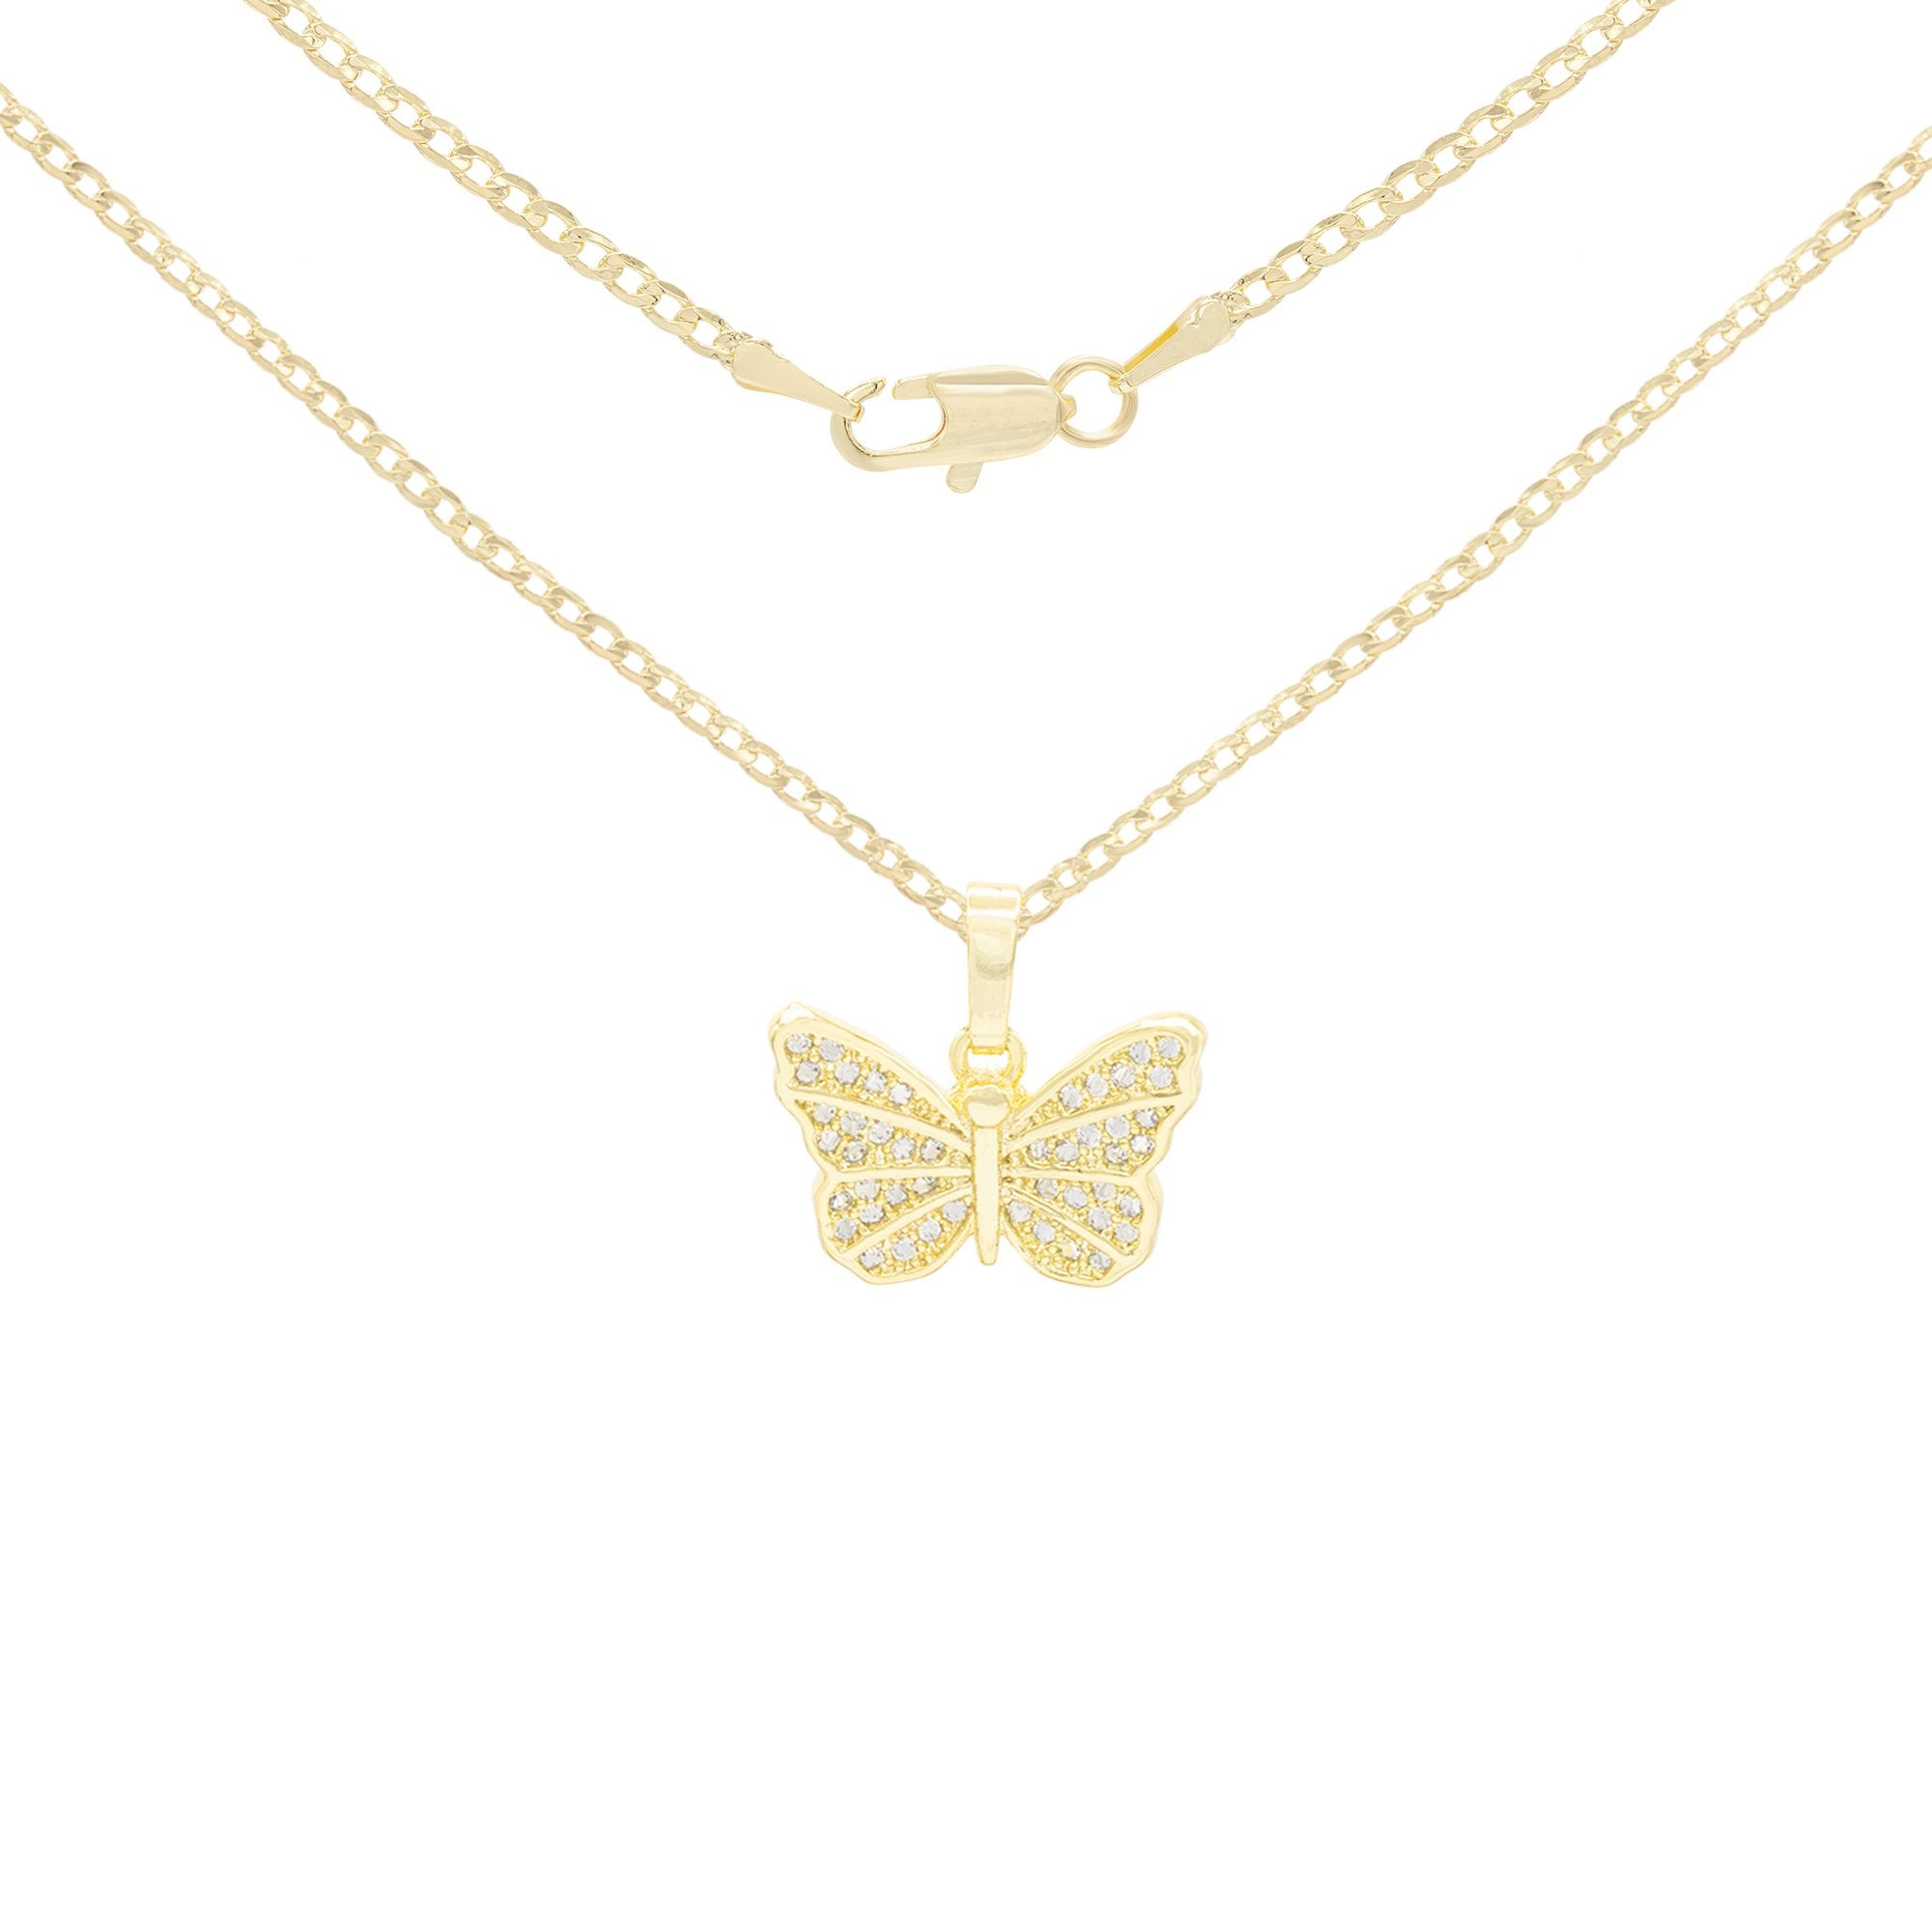 Butterfly Cubic Zirconia Pendant With Necklace Set 14K Gold Filled